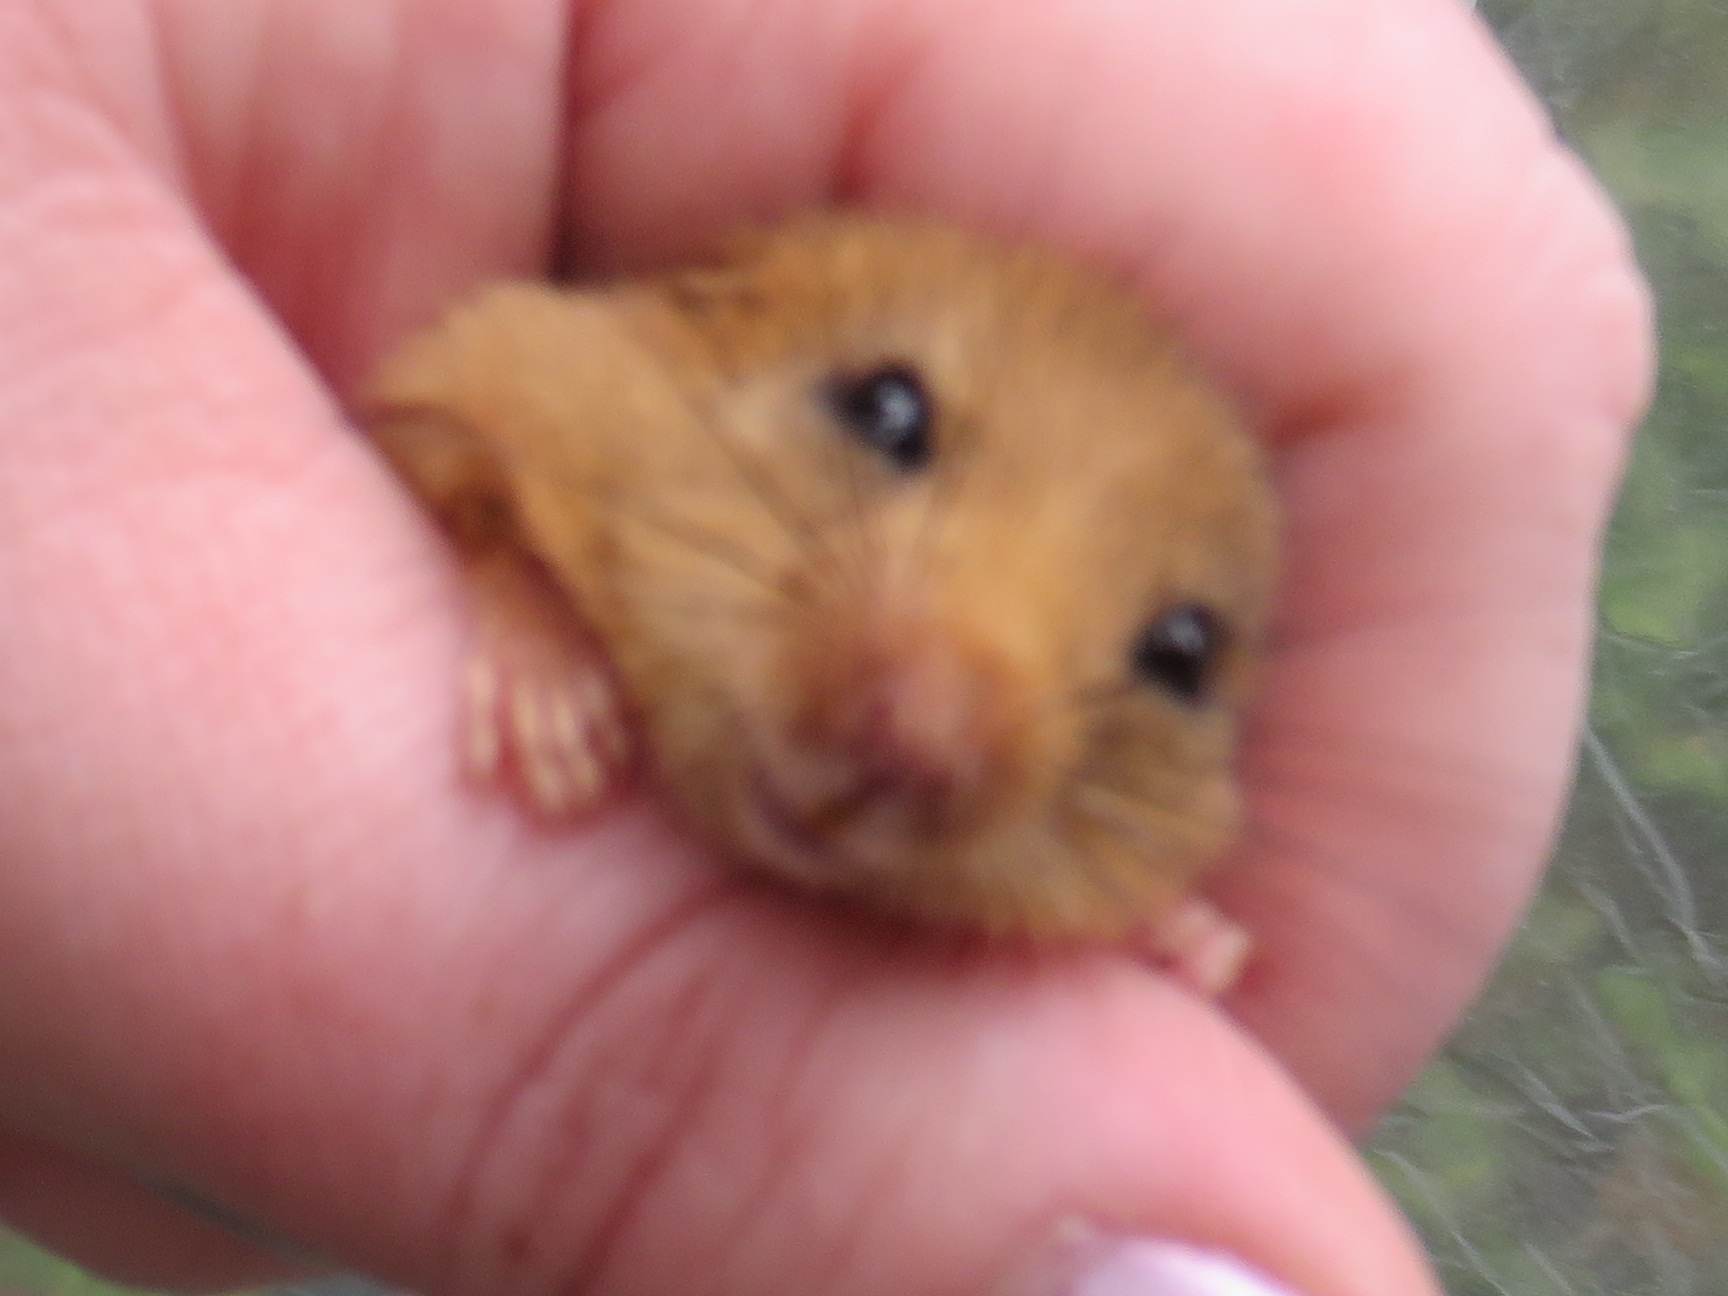 Howardian Local Nature Reserve Dormouse in hand